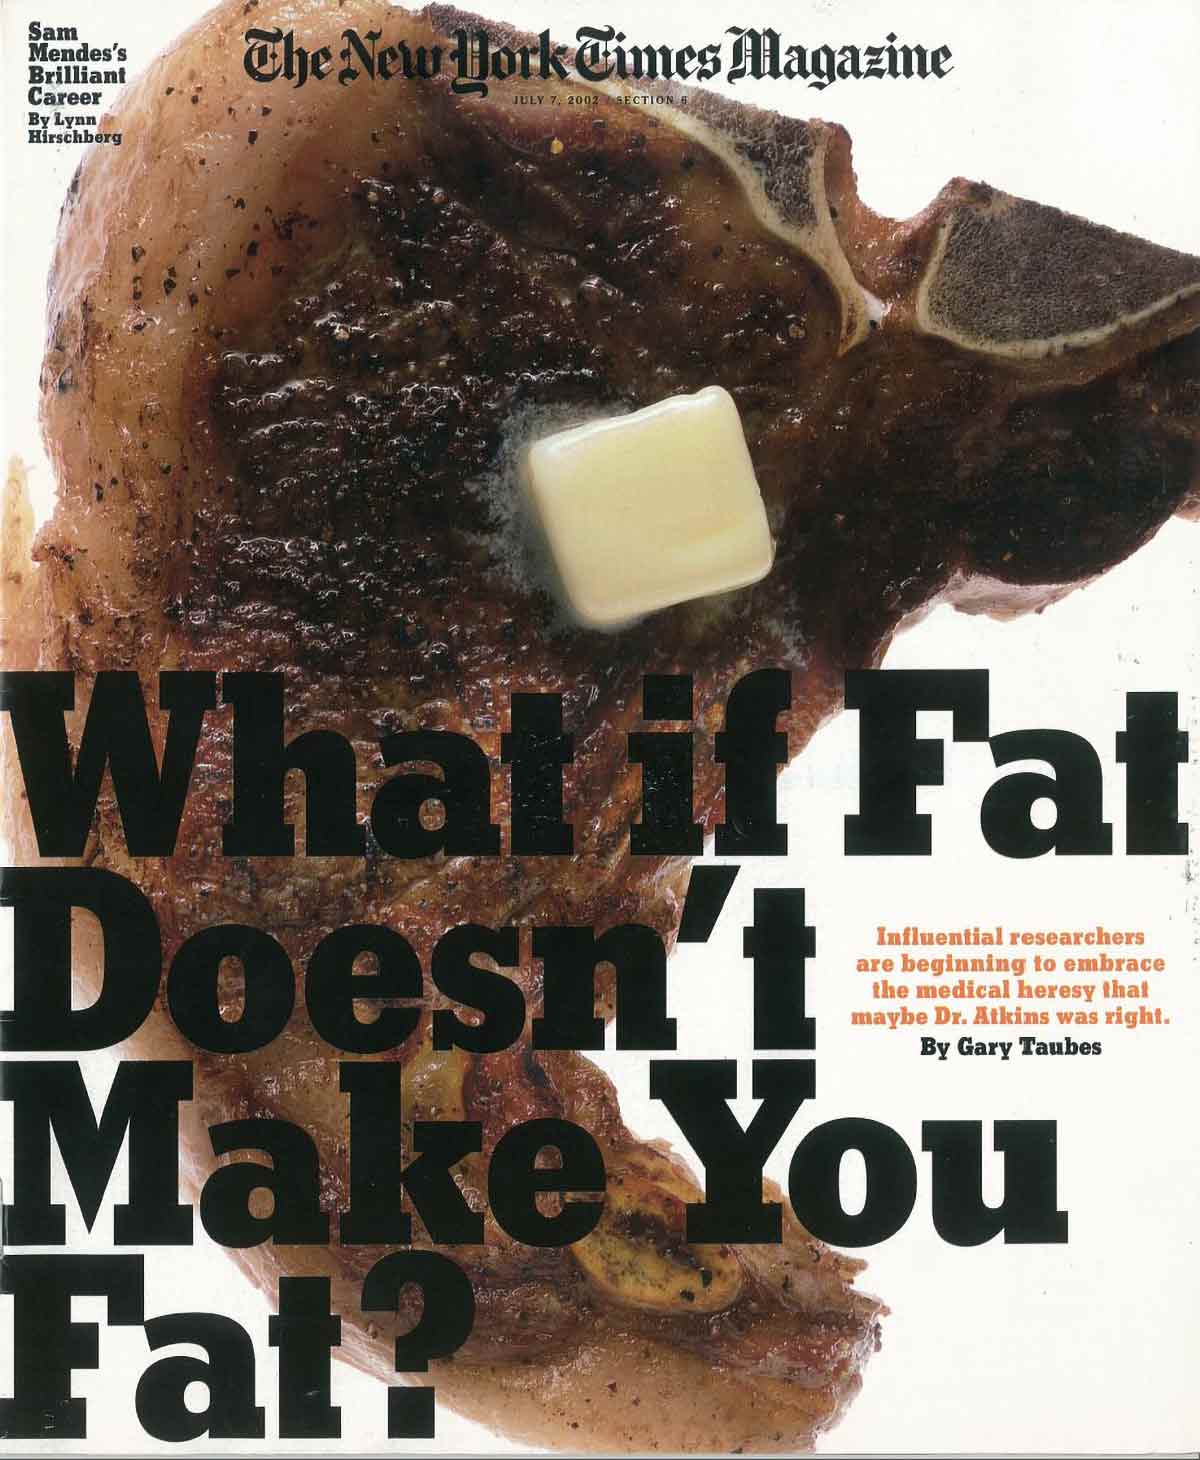 A New York Times Magazine cover with a picture of steak and a pat of butter for the Gary Taubes interview.